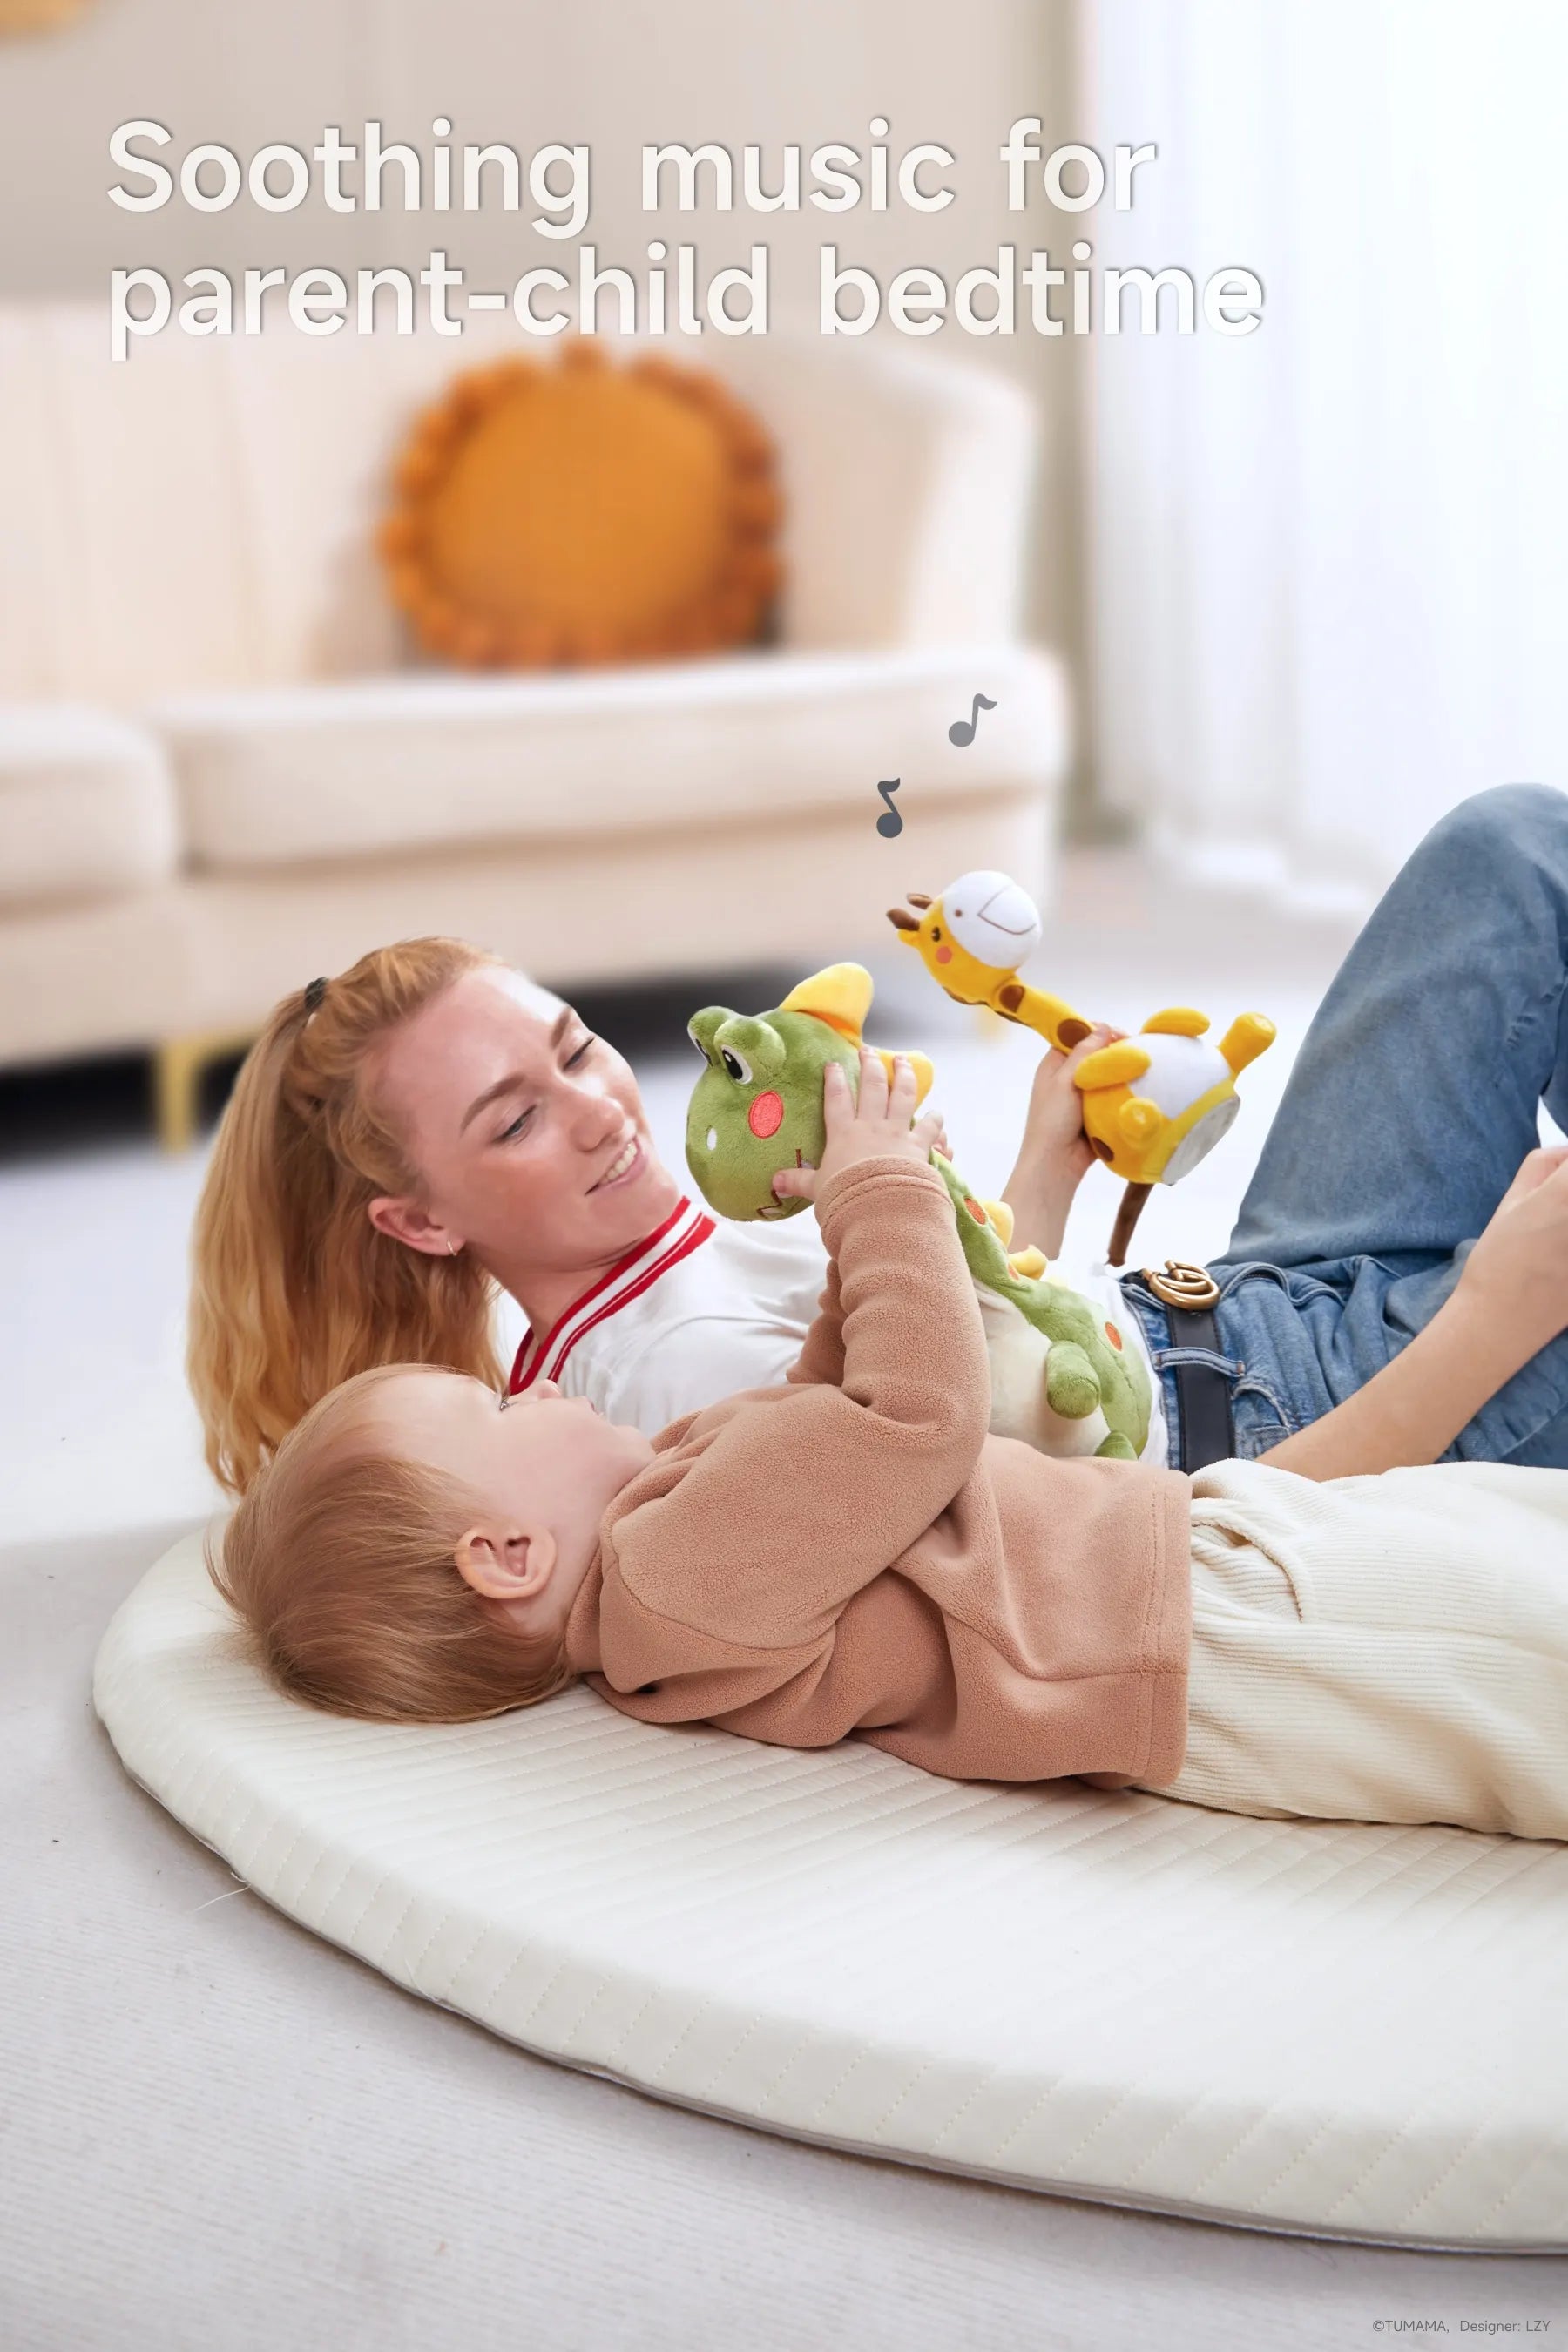 Voice recording and twist musical features in baby toys